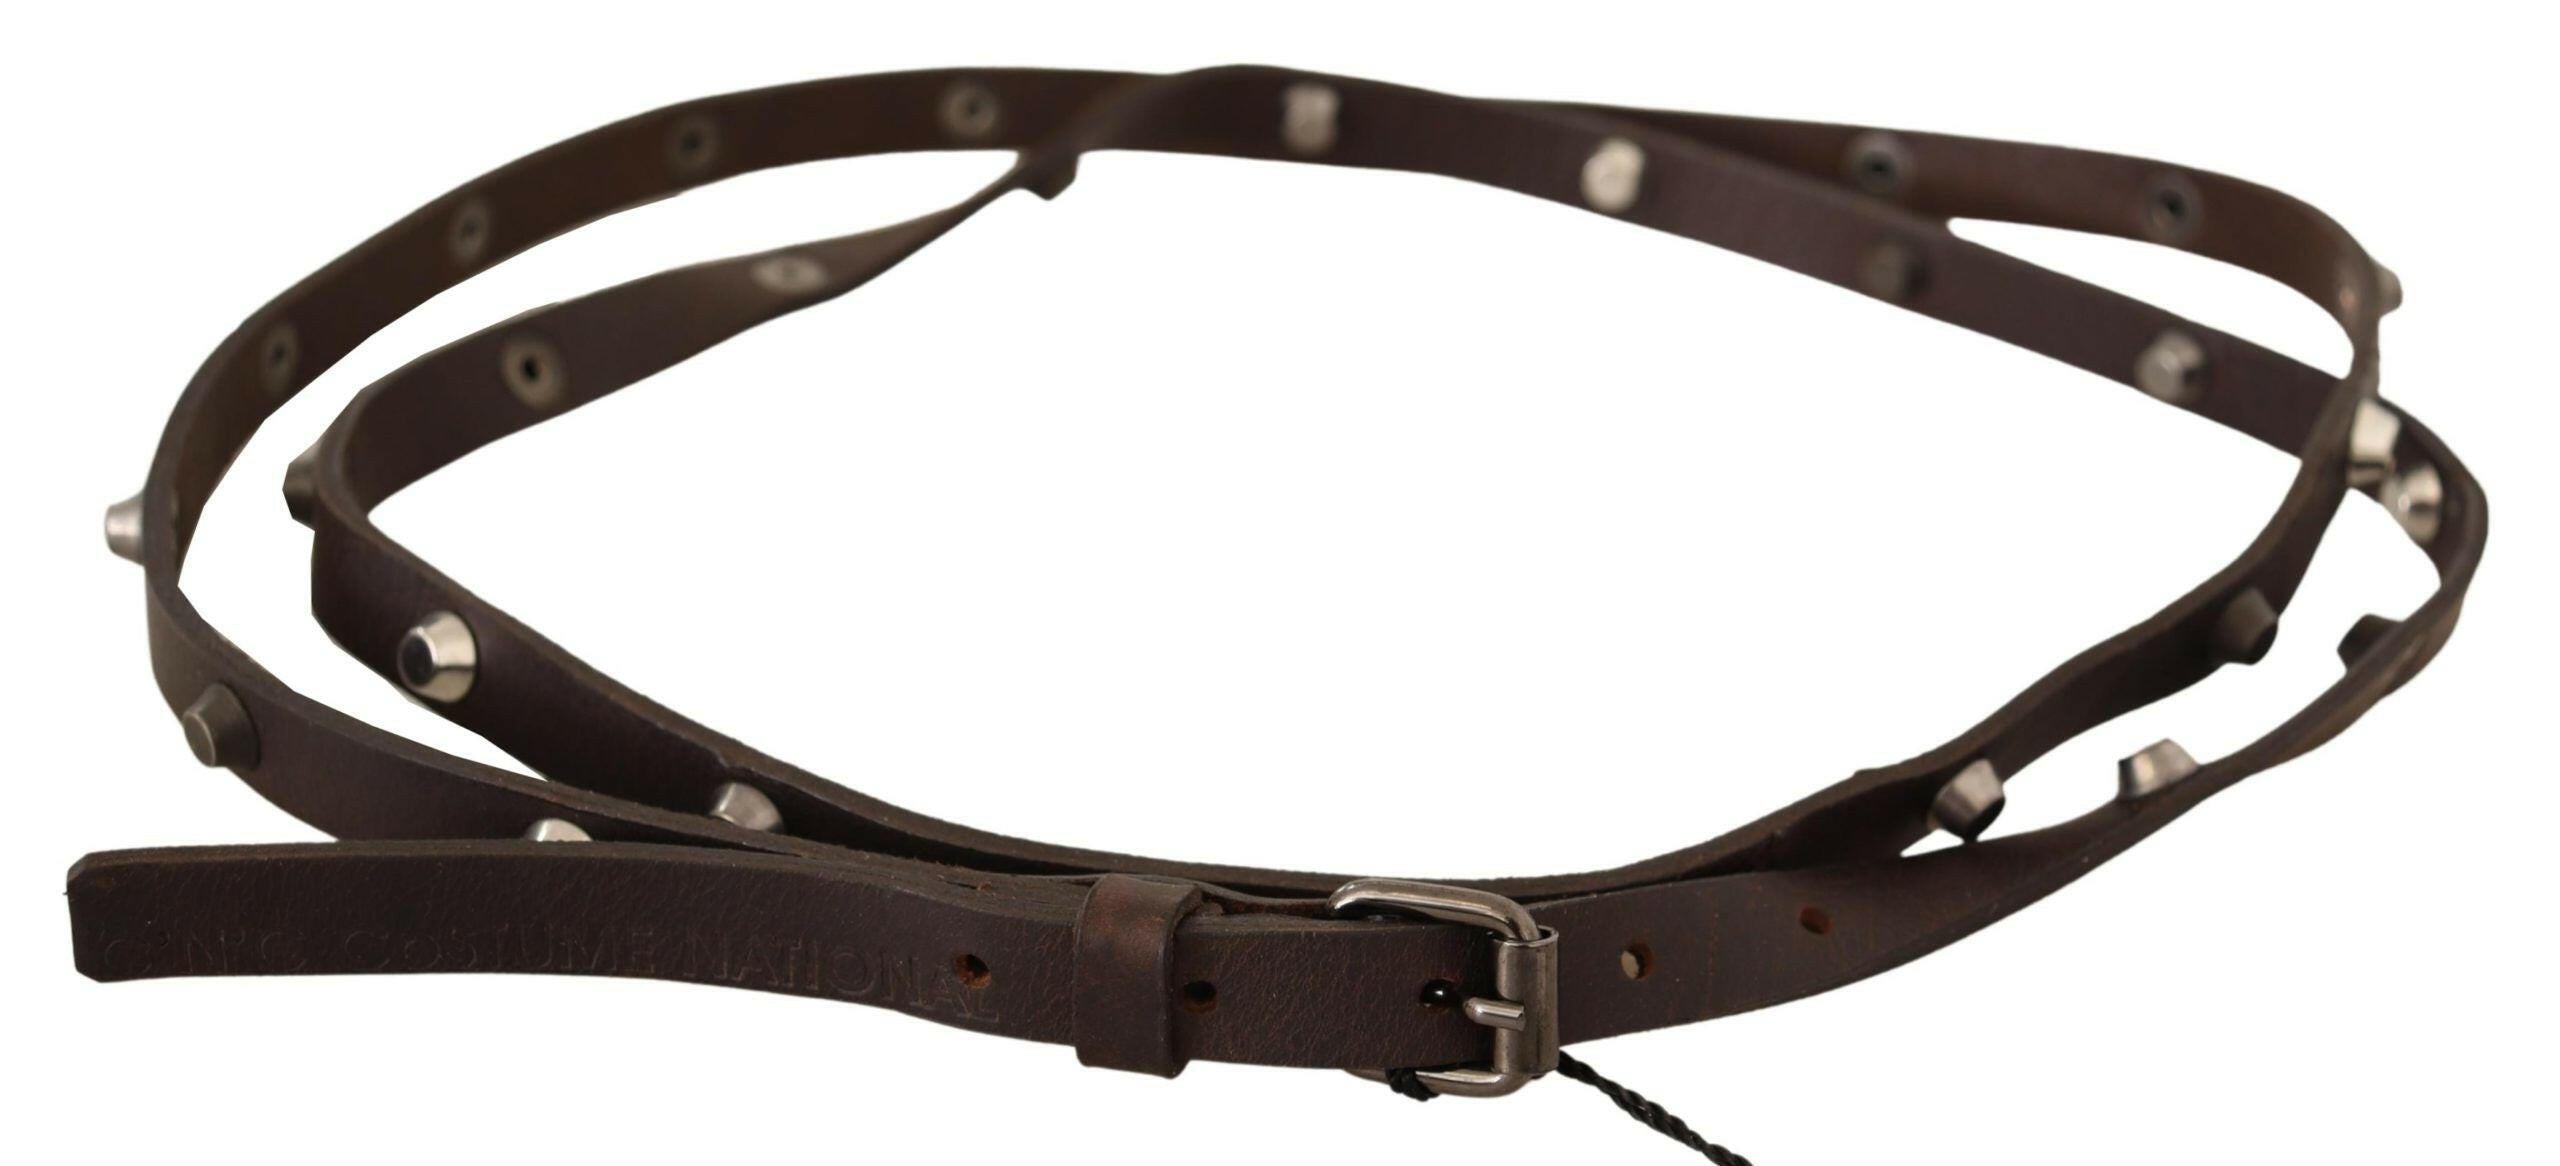 Costume National Brown Leather Silver Tone Buckle Belt - GENUINE AUTHENTIC BRAND LLC  